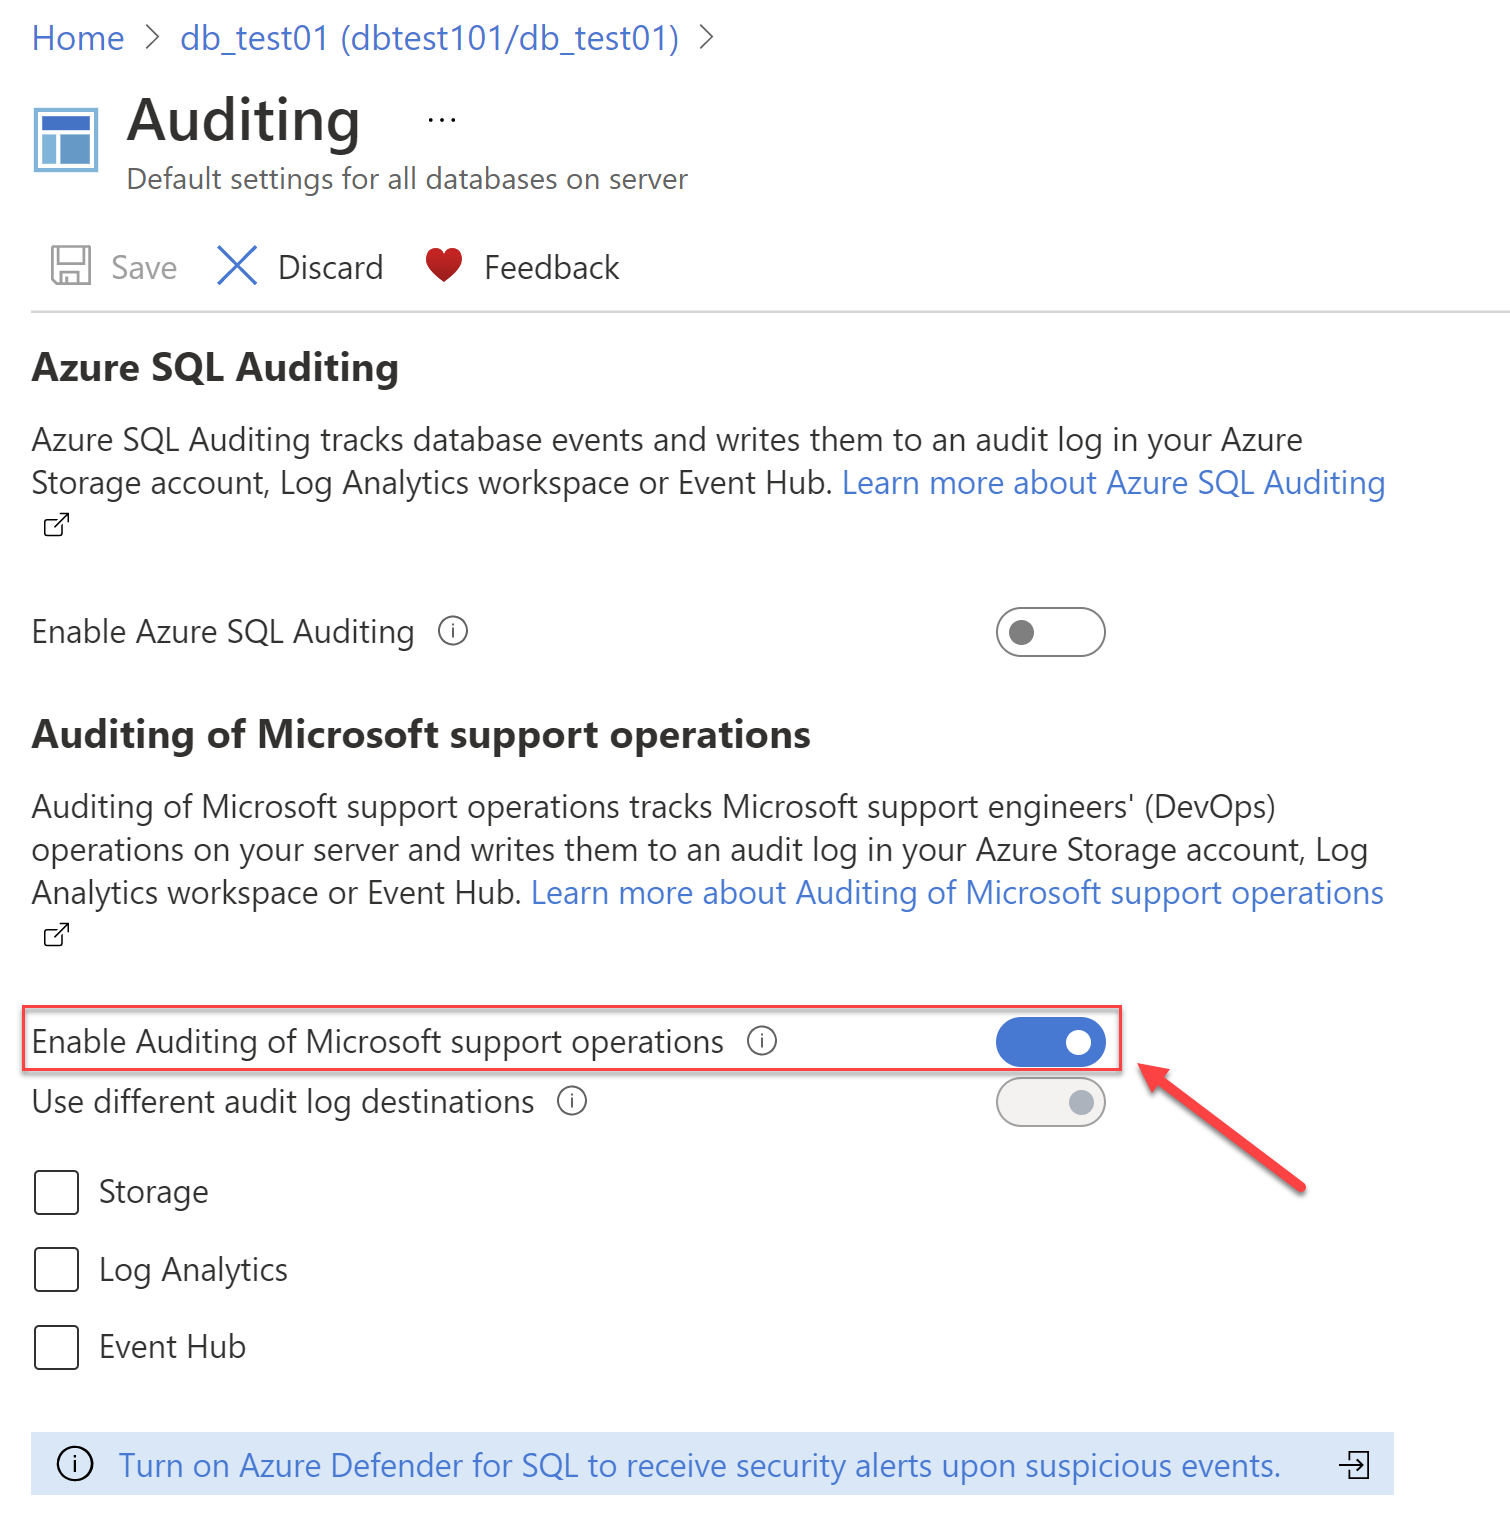 Enable Auditing of Microsoft support operations